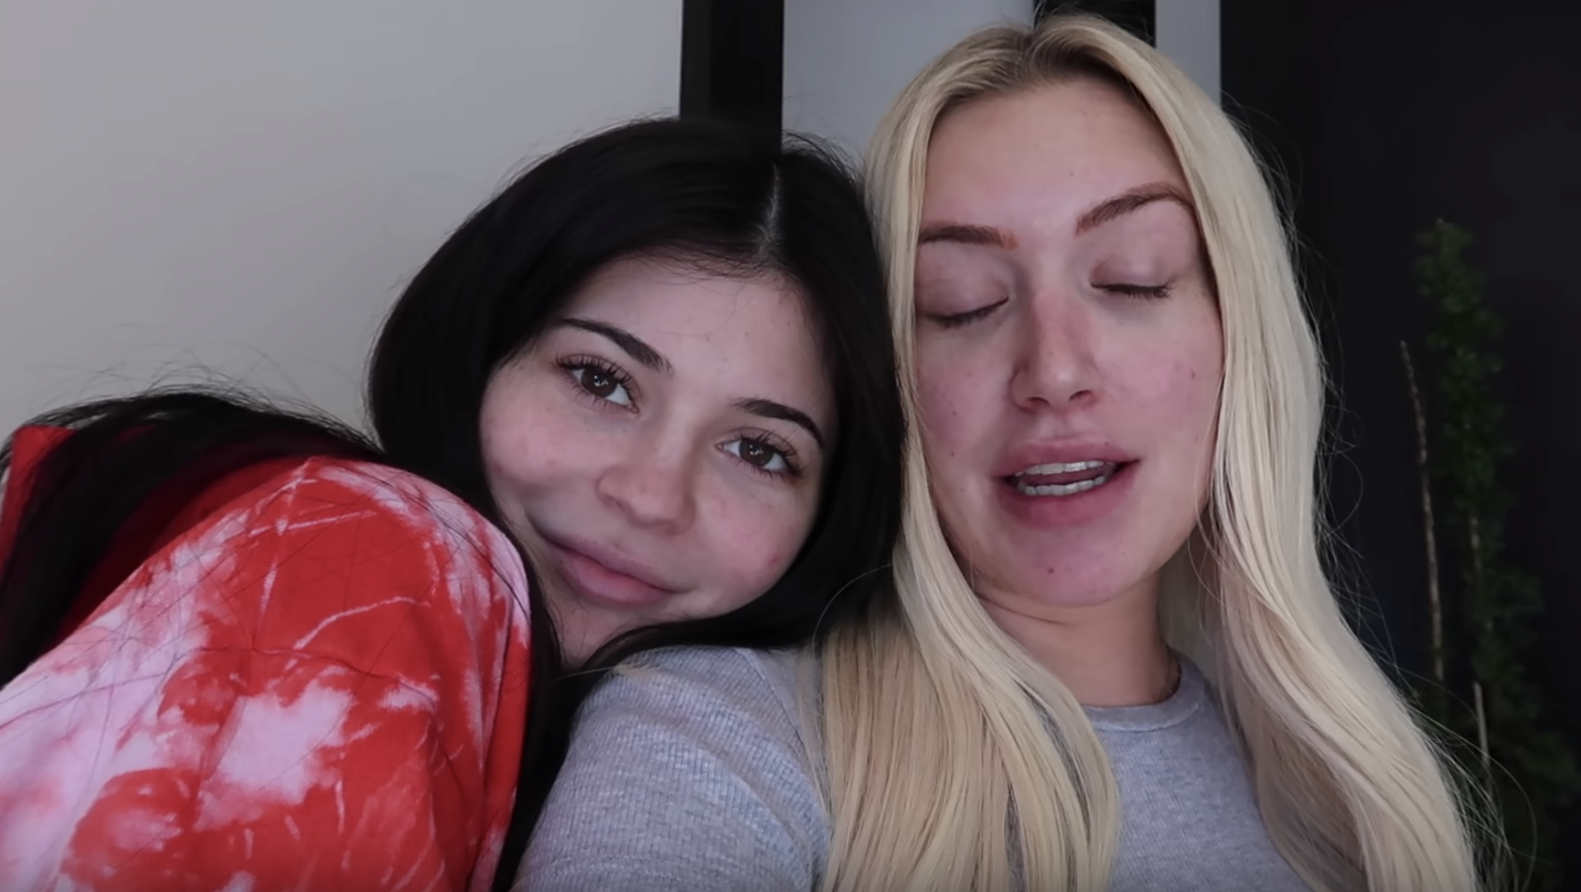 She is we better now. Стейси Караниколау. Kylie Jenner and stassiebaby.